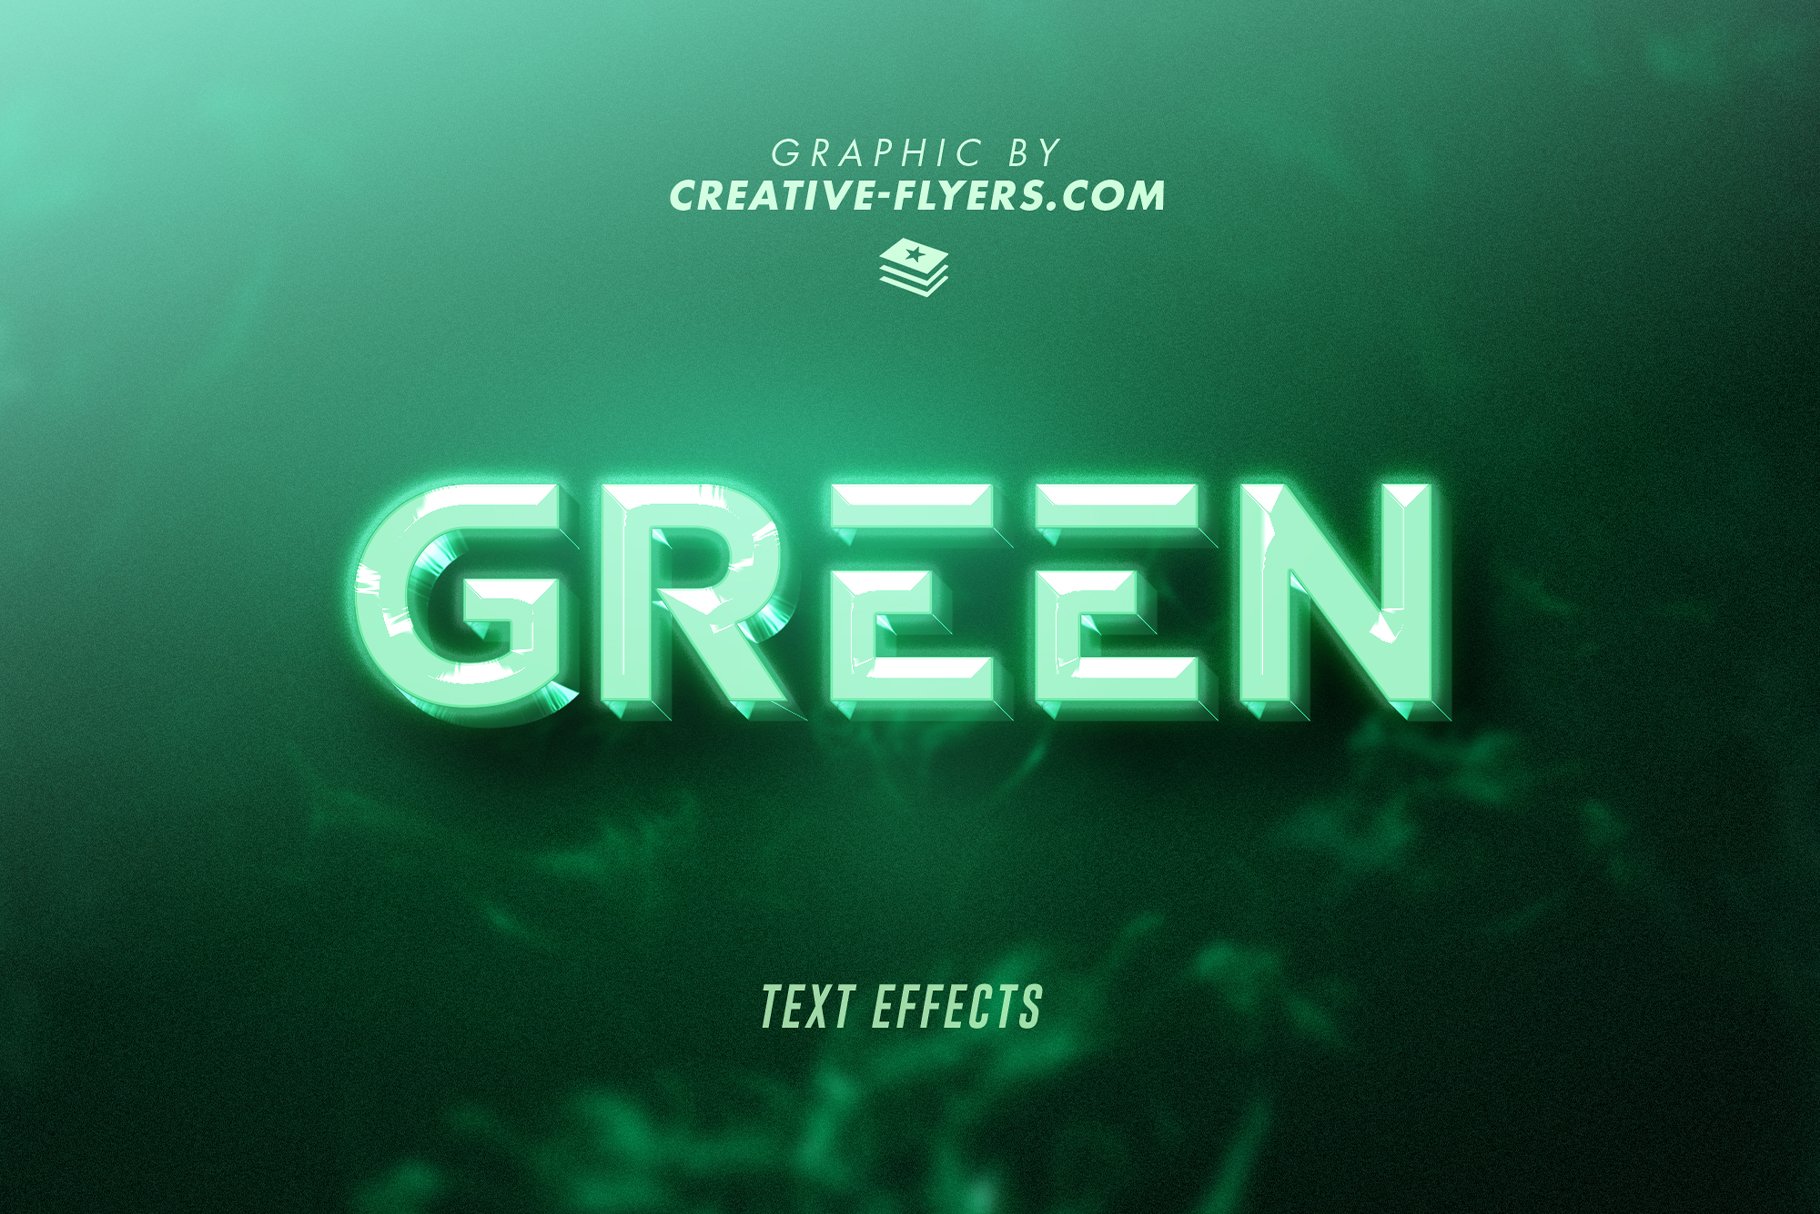 Photoshop Text Effects Green Emeraldcover image.